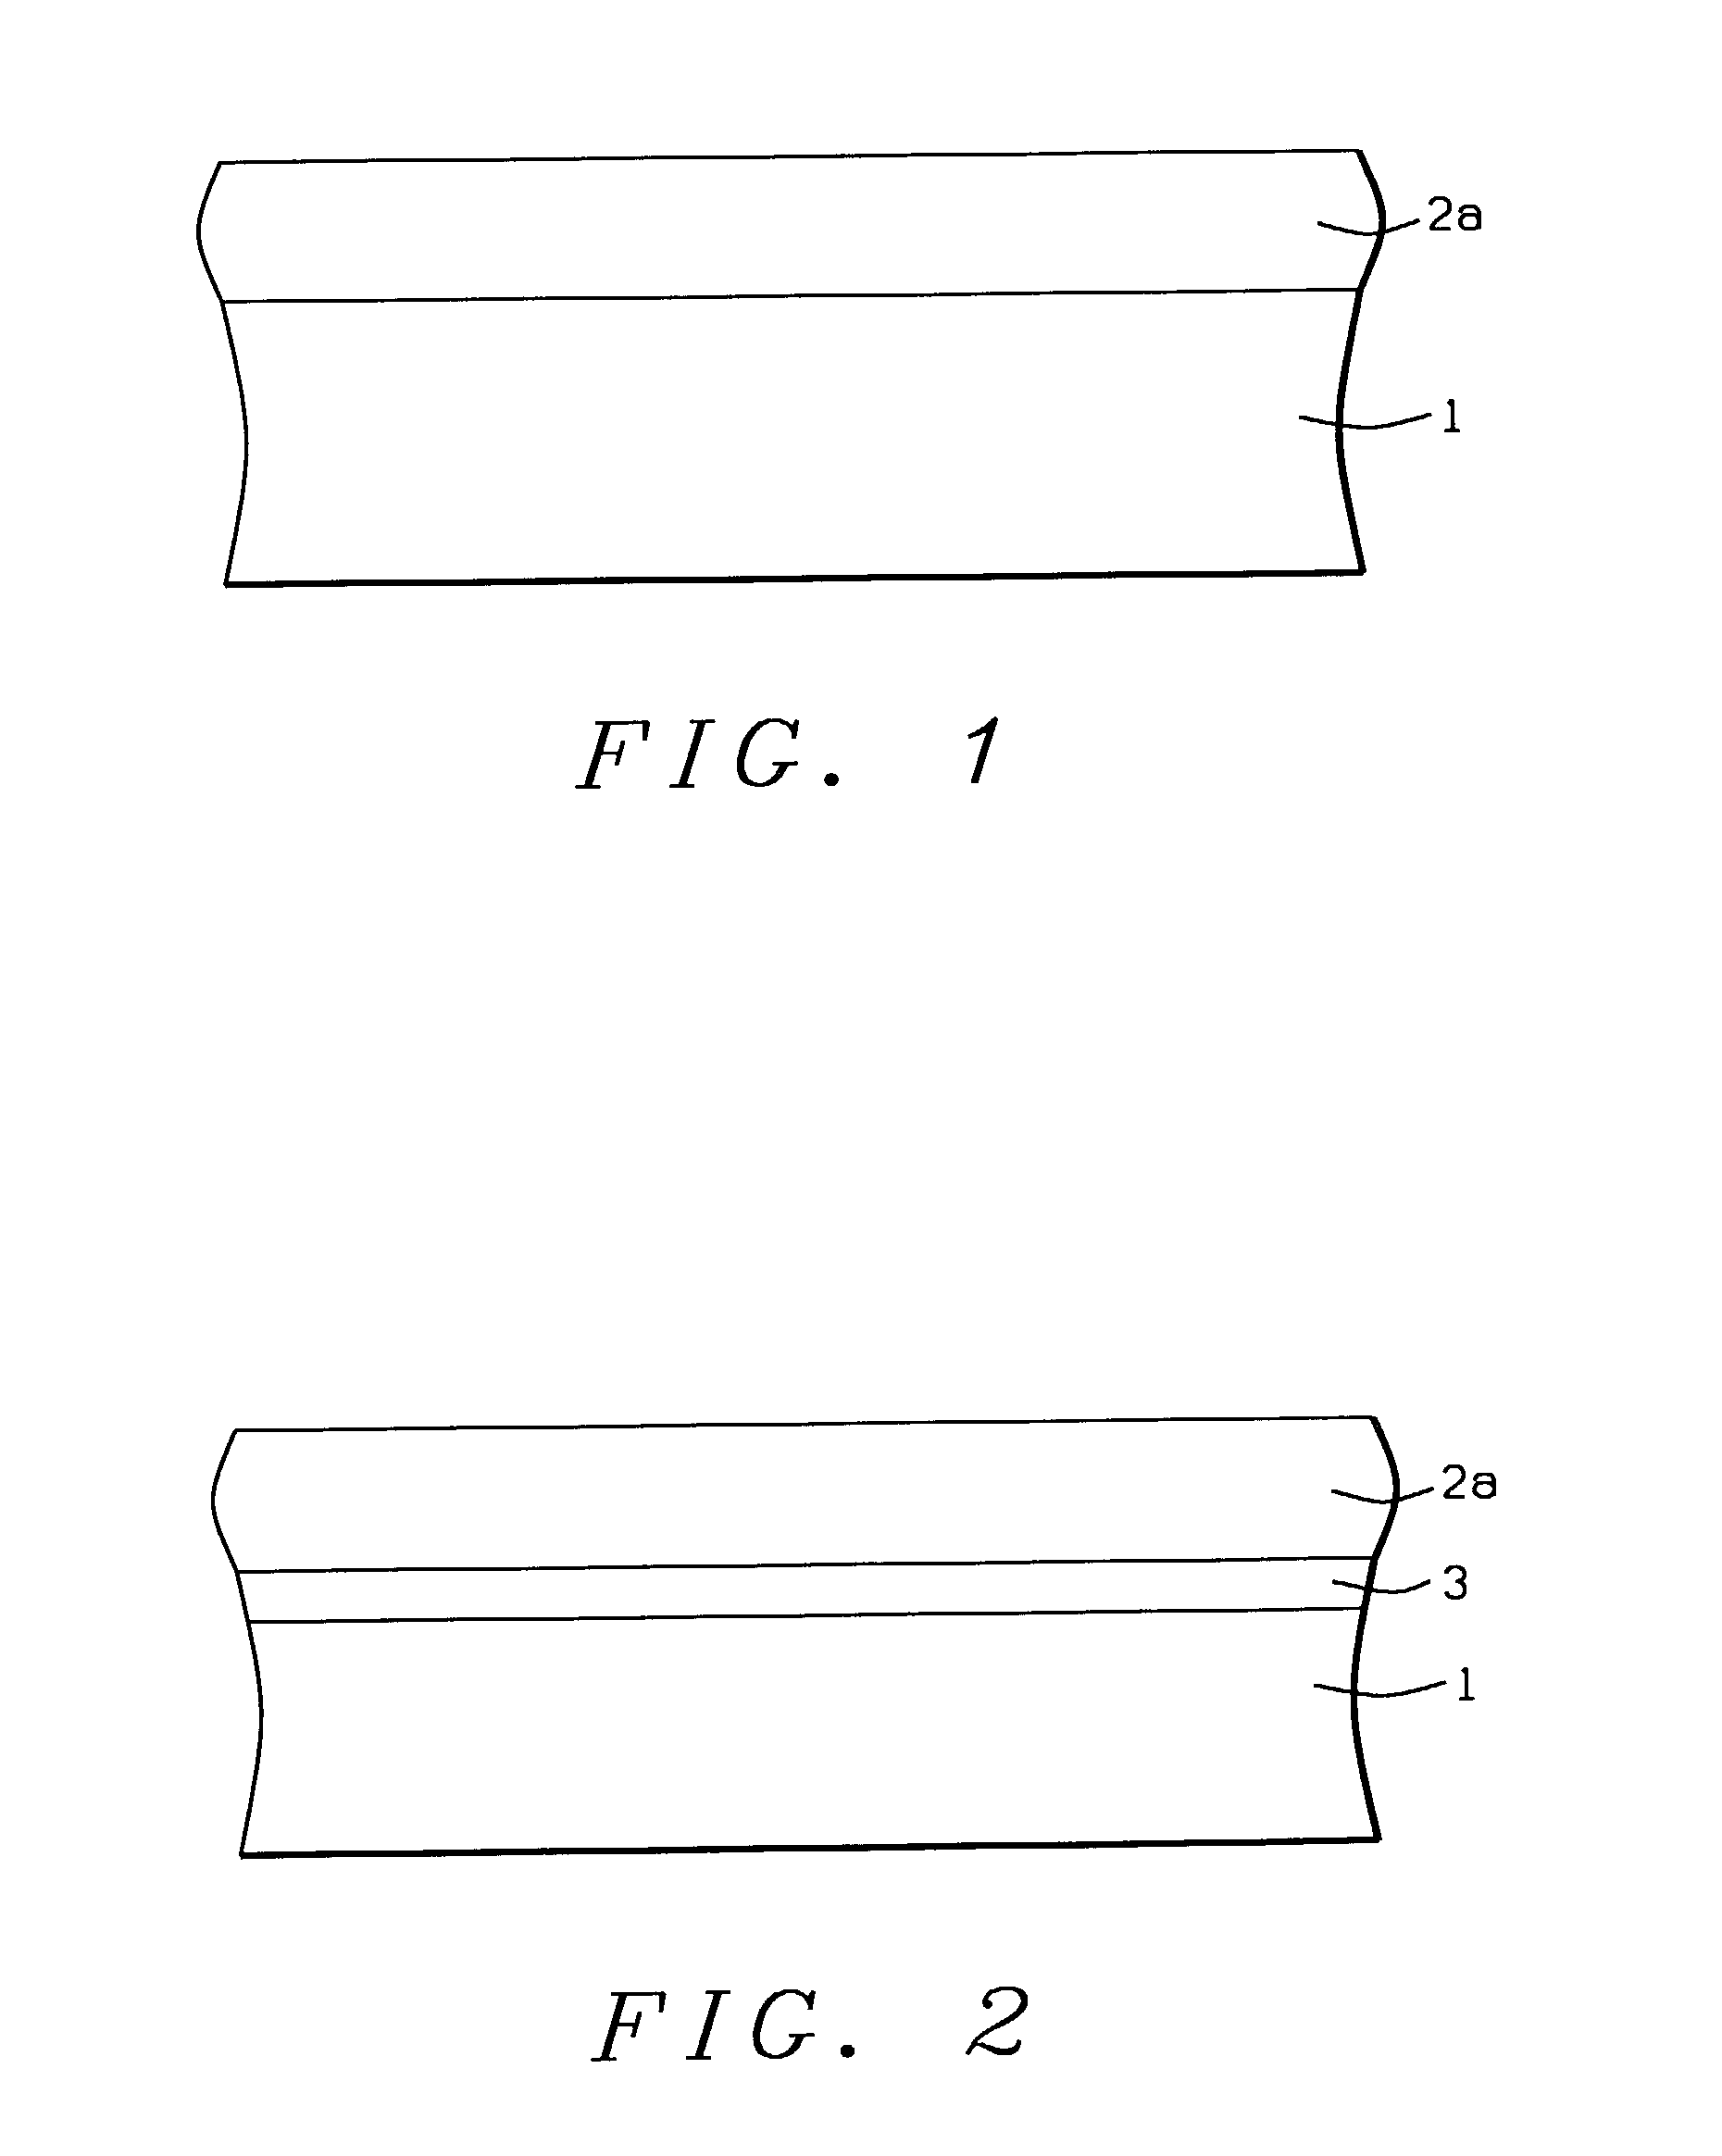 Method of fabricating a gate dielectric layer with reduced gate tunnelling current and reduced boron penetration